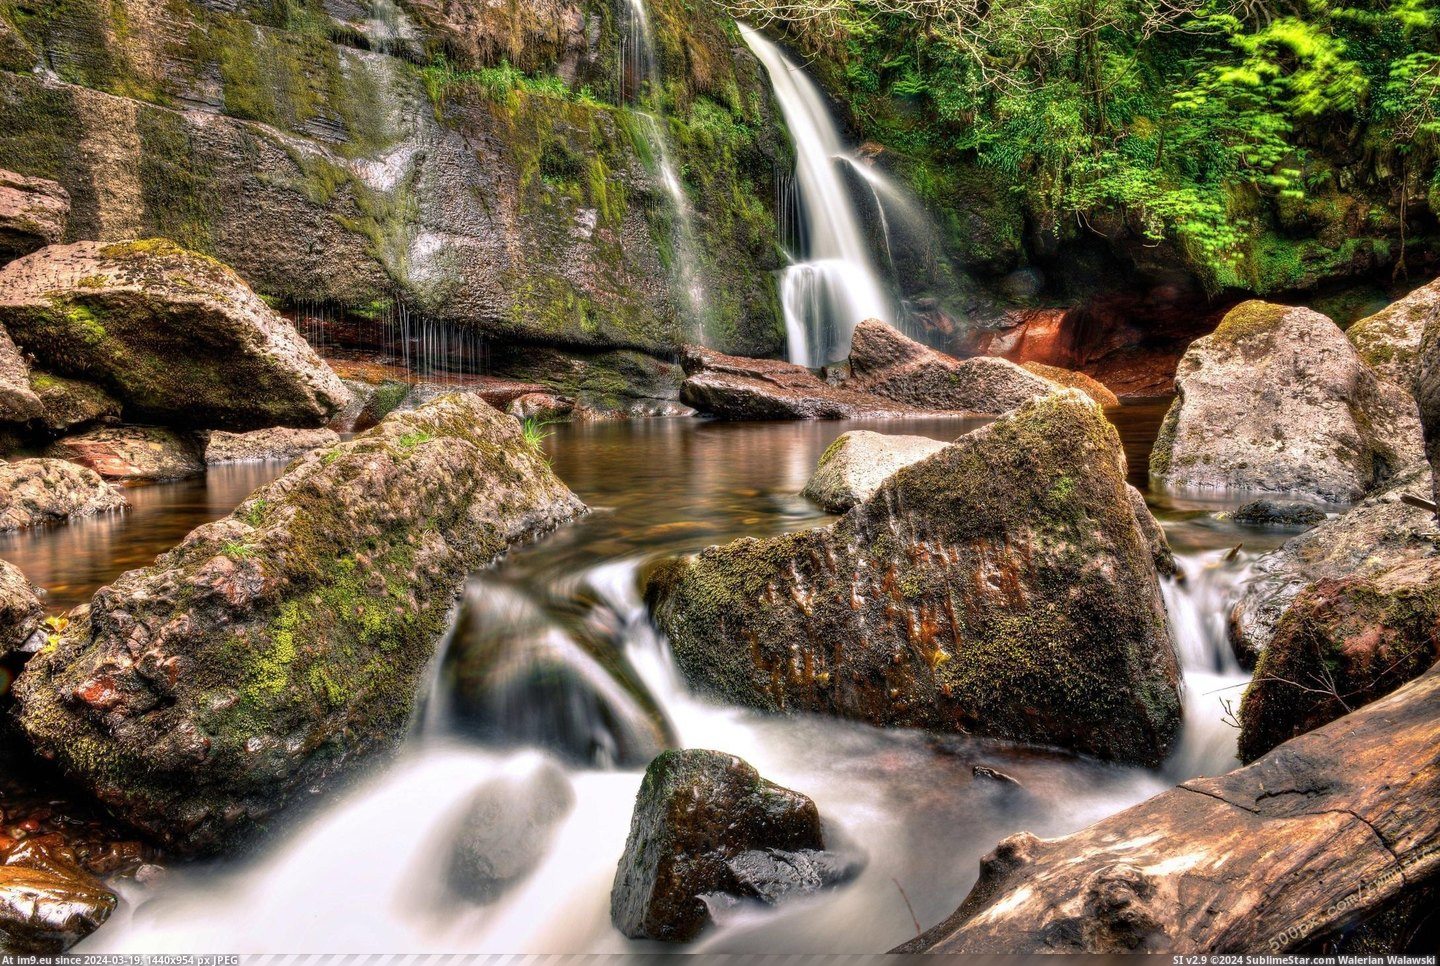 #Find #Waterfall #Secluded #Argyll #Nameless #Scotland #Locals [Earthporn] Only us locals will be able to tell you how to find this secluded, nameless waterfall in Argyll, Scotland. [2180x145 Pic. (Bild von album My r/EARTHPORN favs))